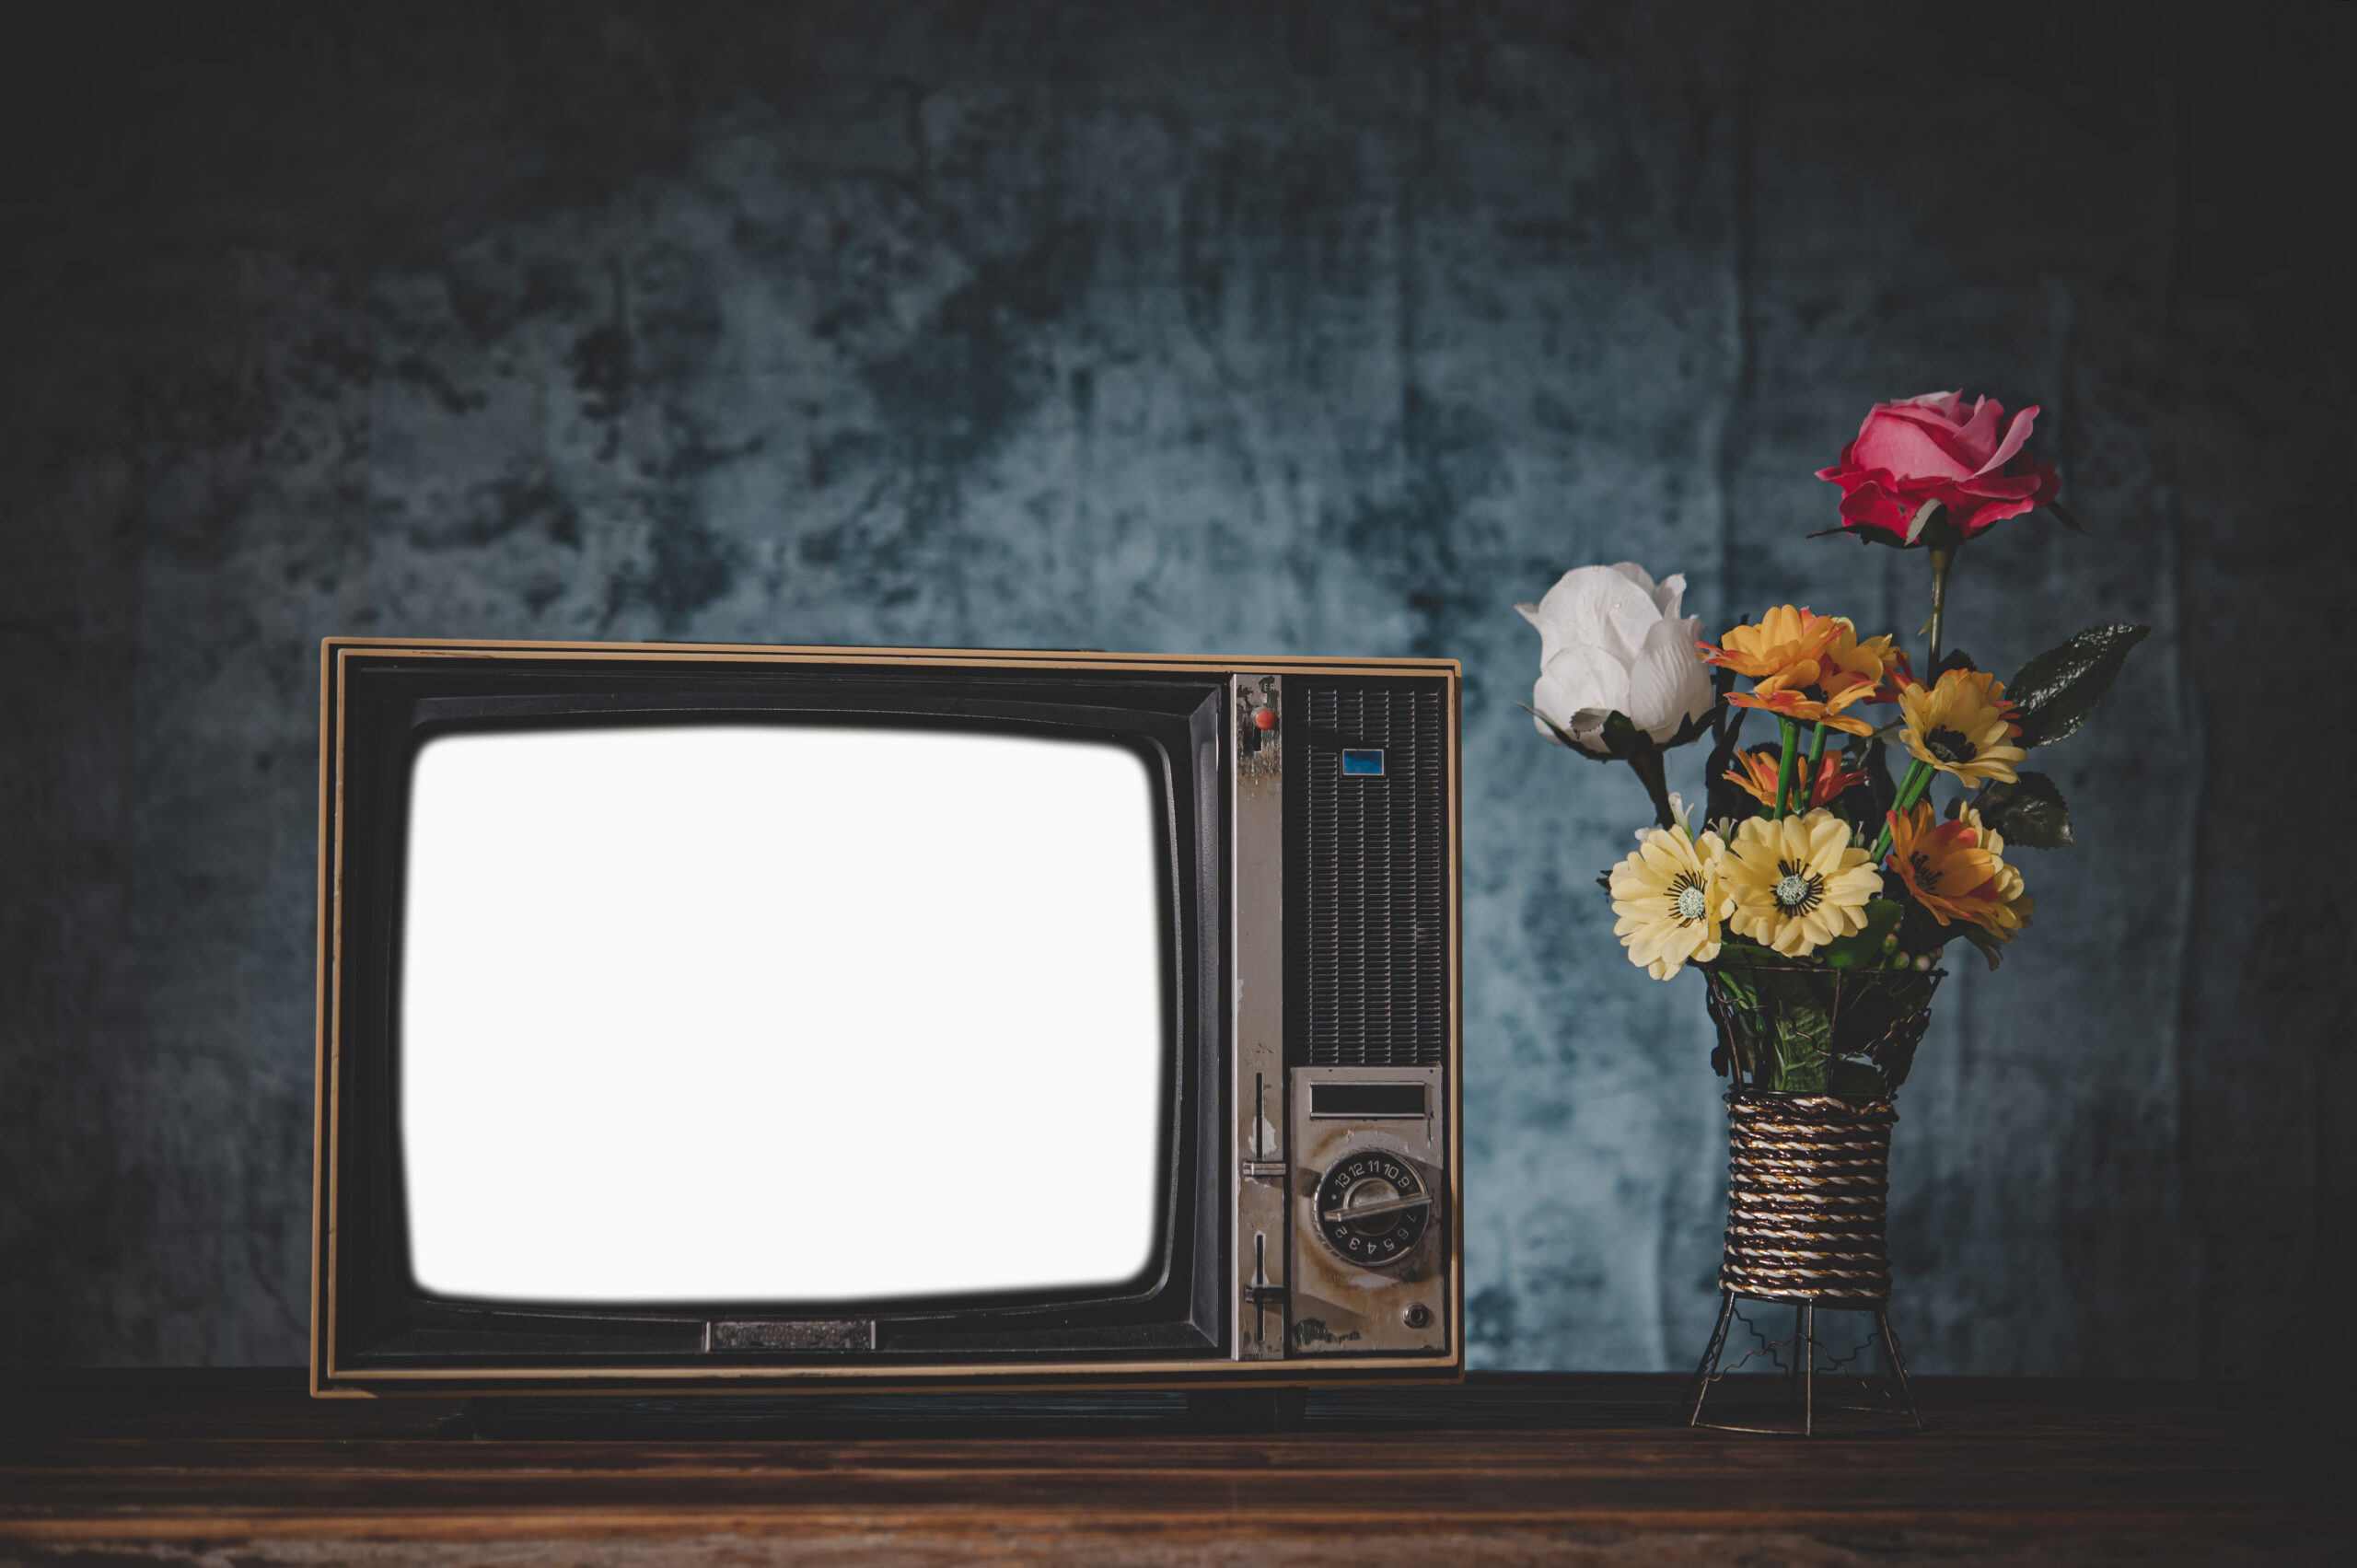 Old retro TV It’s still life with flower vases.